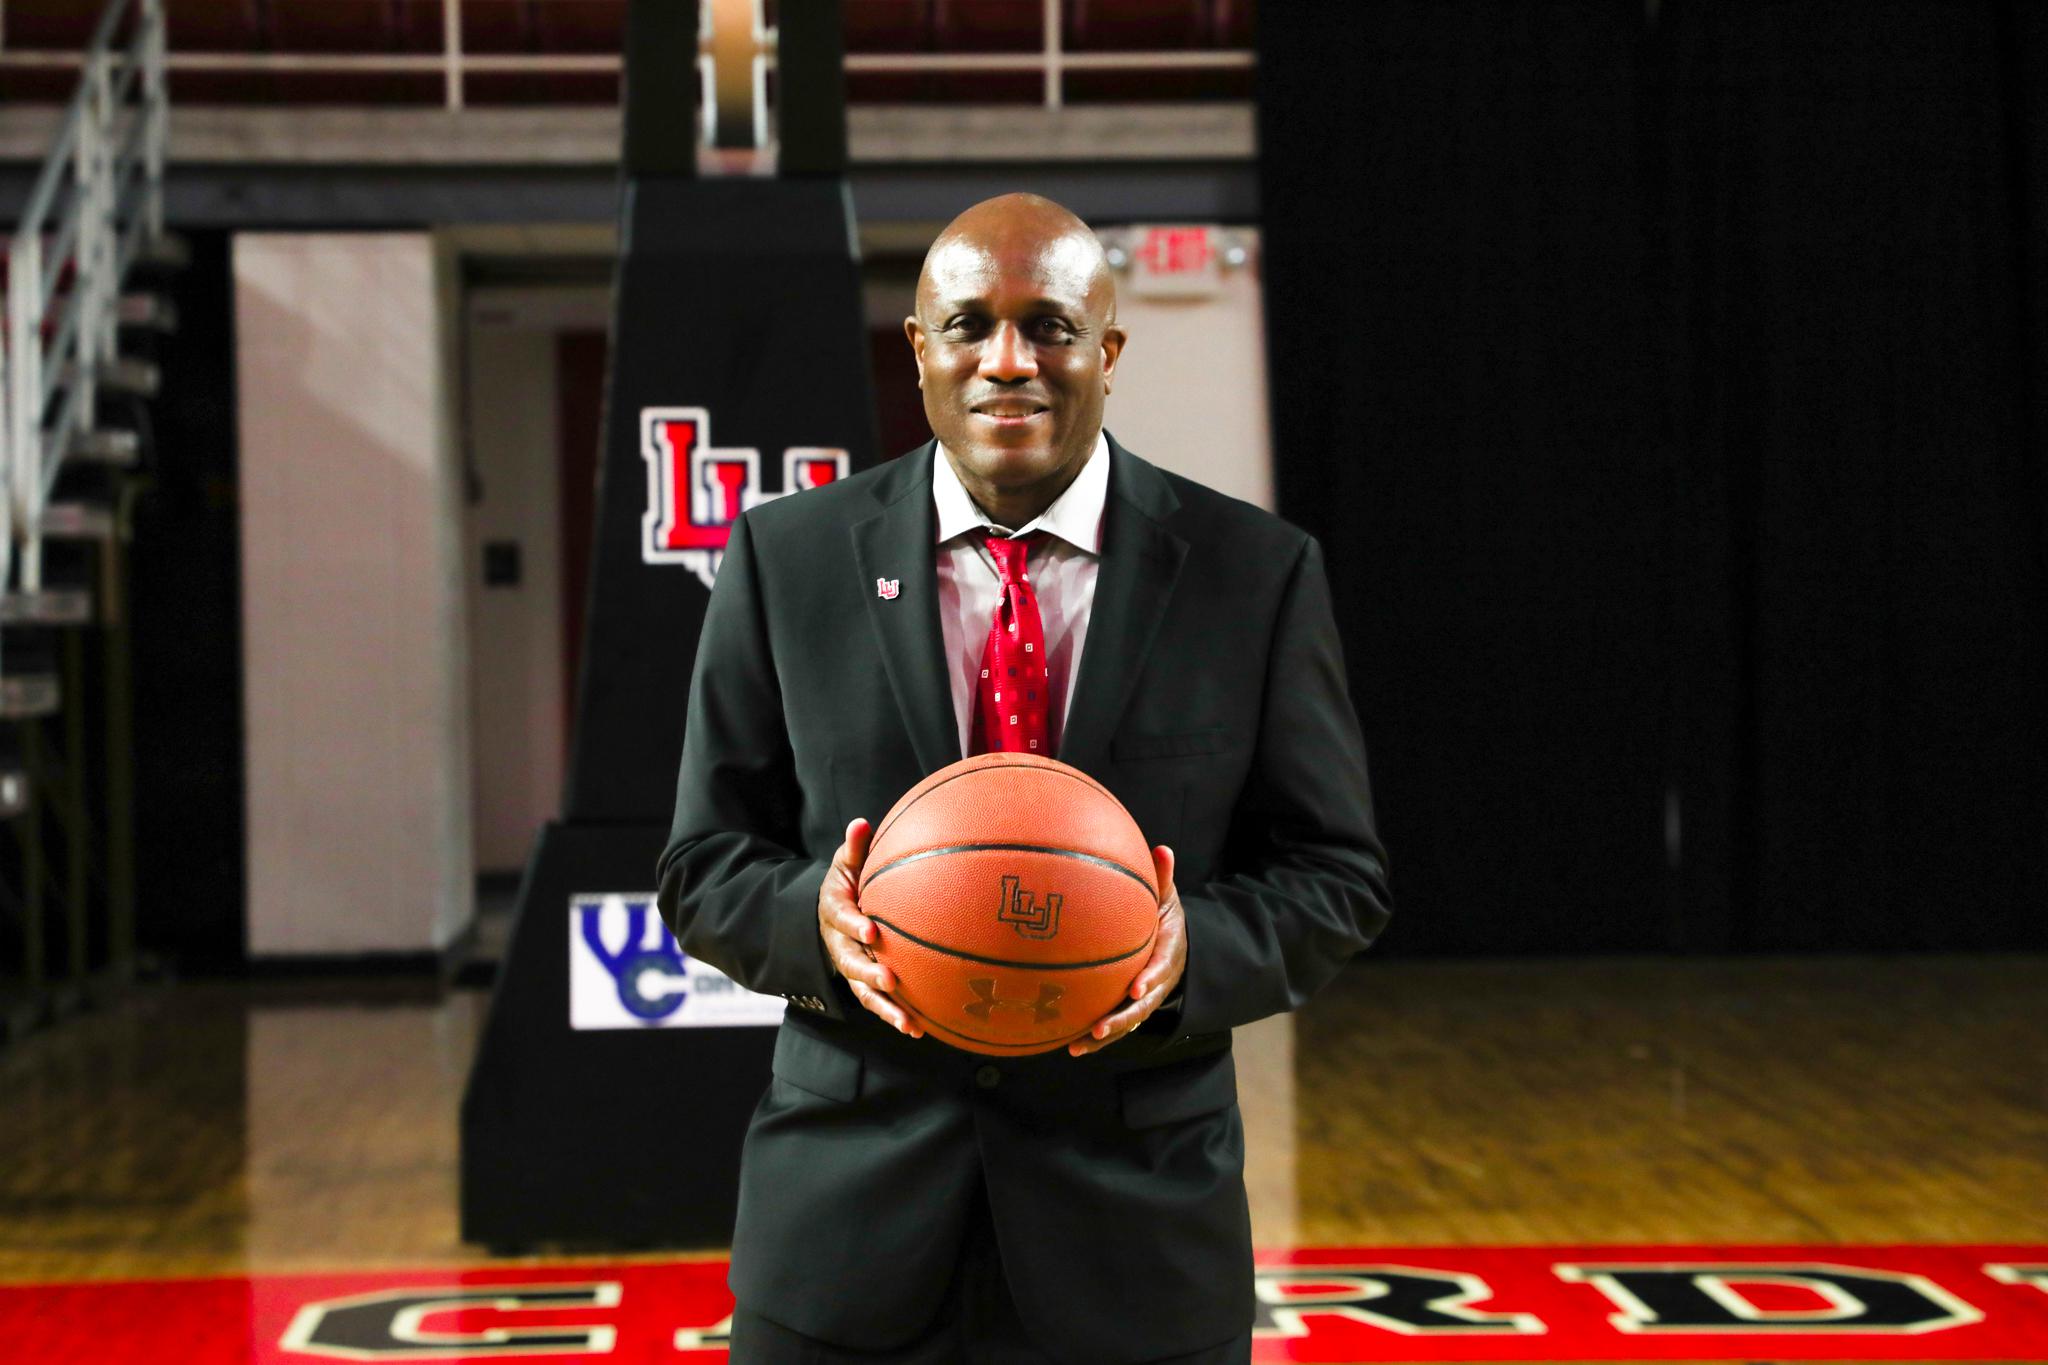 LU invests more money in new basketball coach